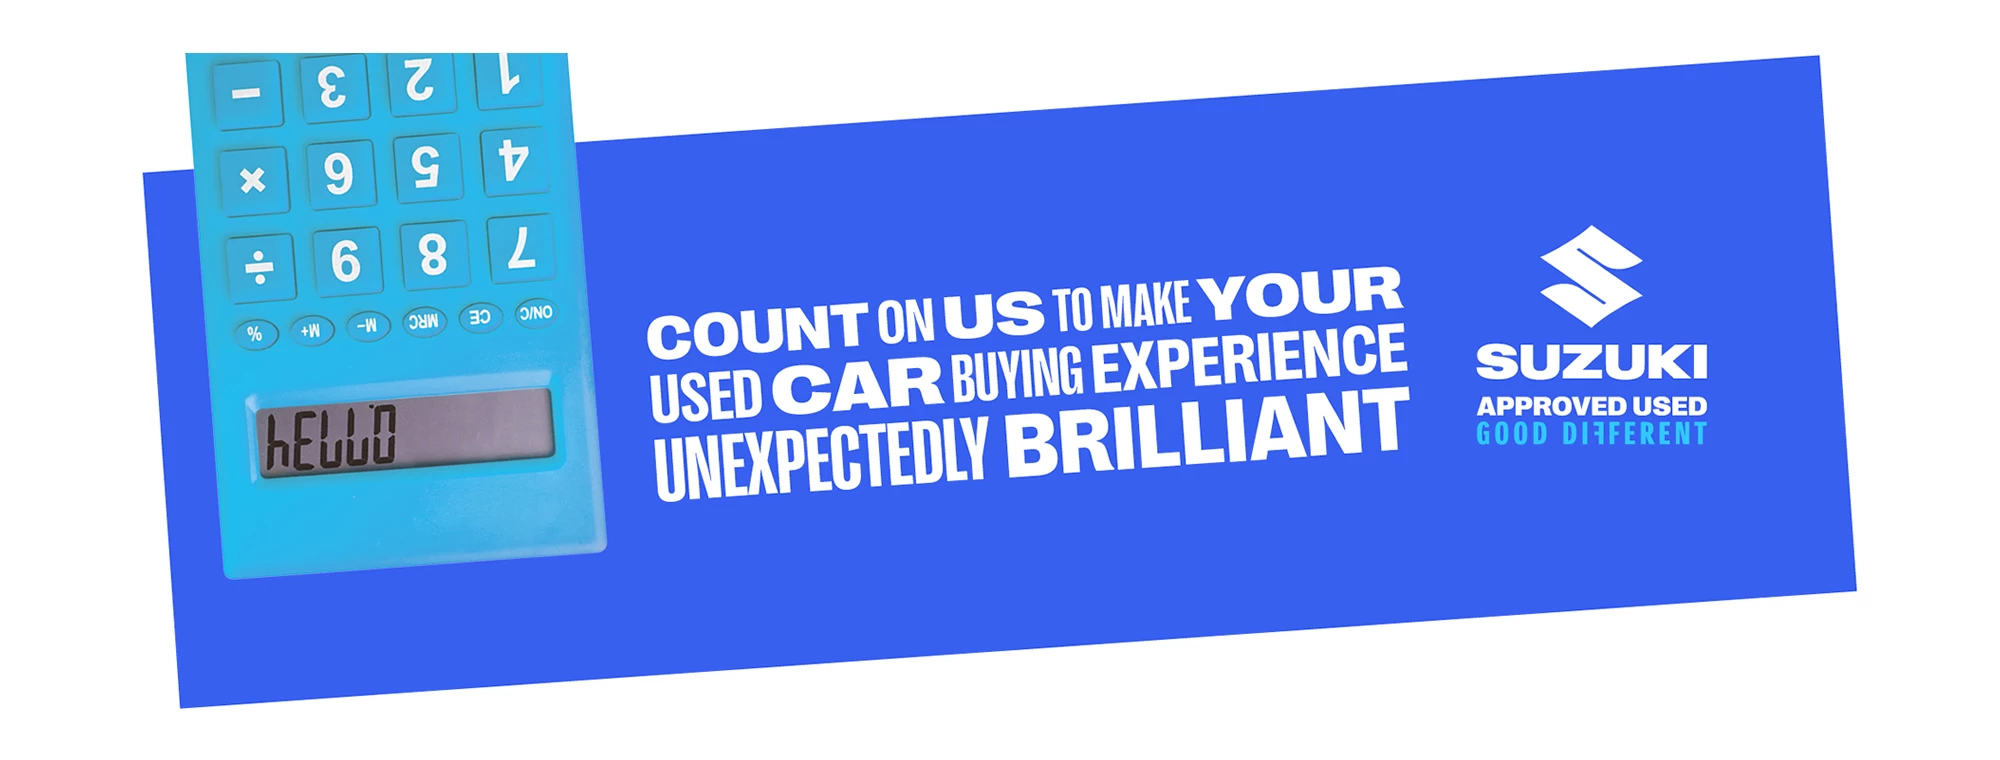 Count on us to make your used car buying experience unexpectedly brilliant